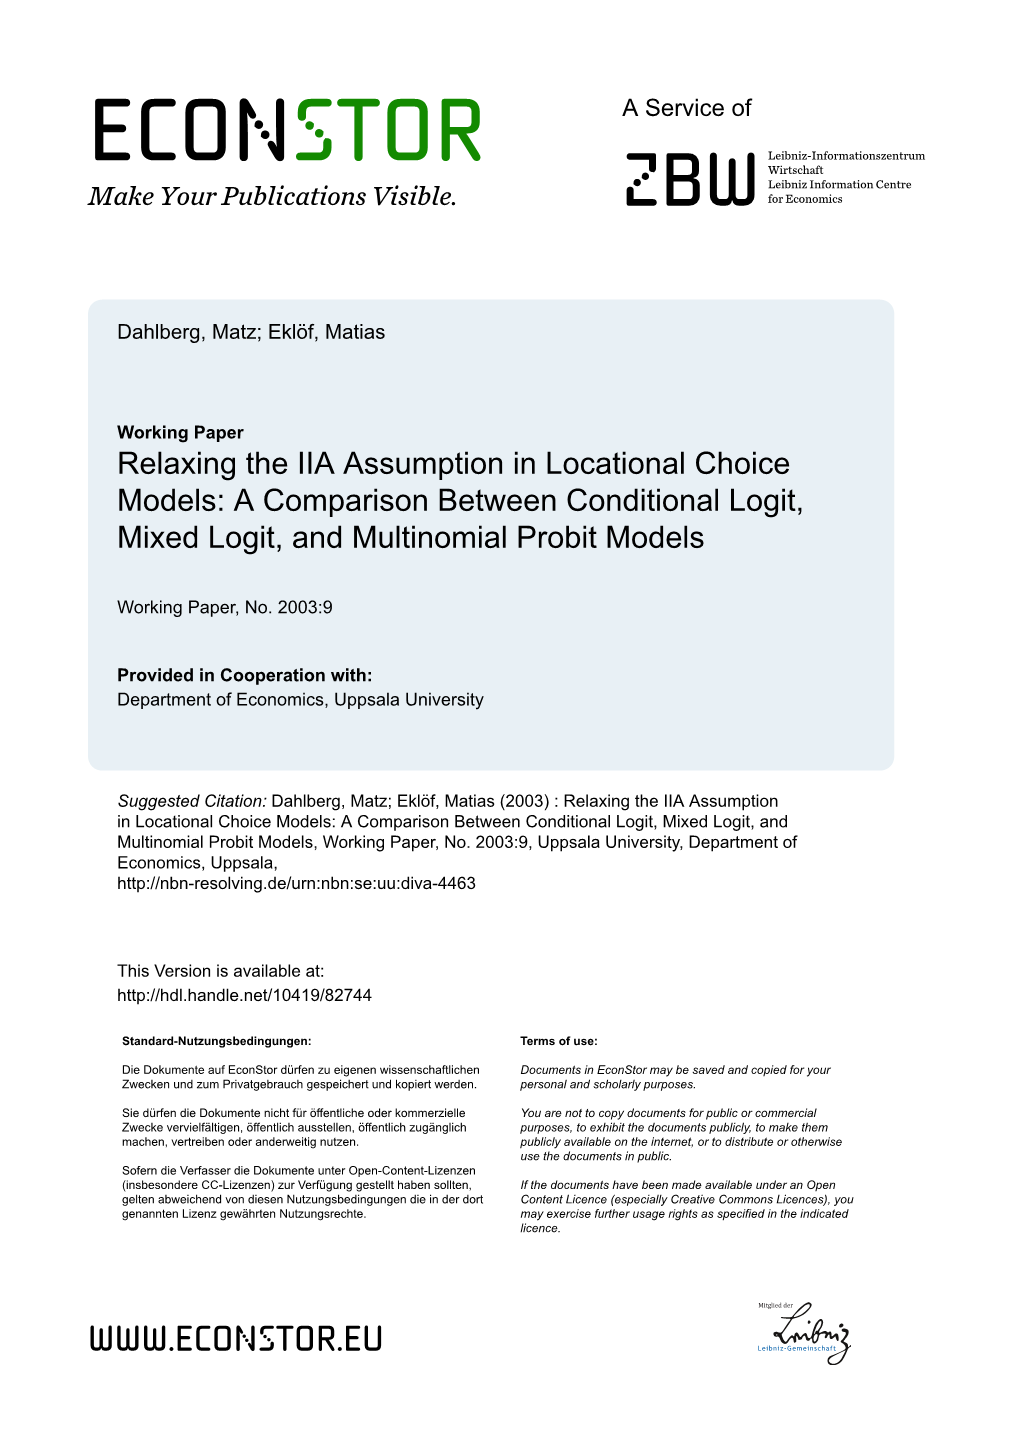 A Comparison Between Conditional Logit, Mixed Logit, and Multinomial Probit Models